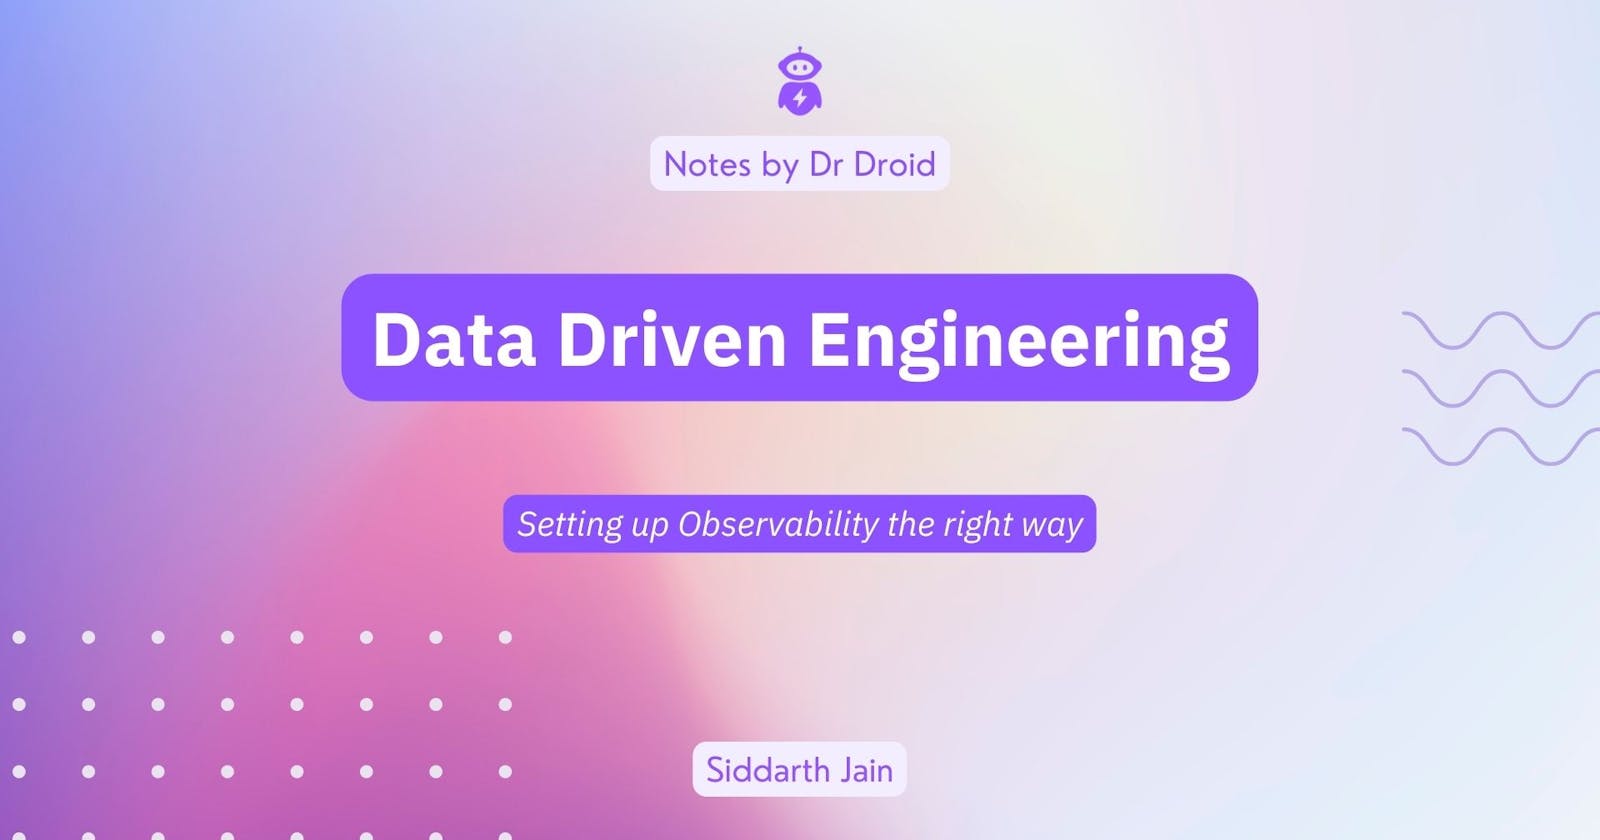 Building a Data-Driven Engineering culture